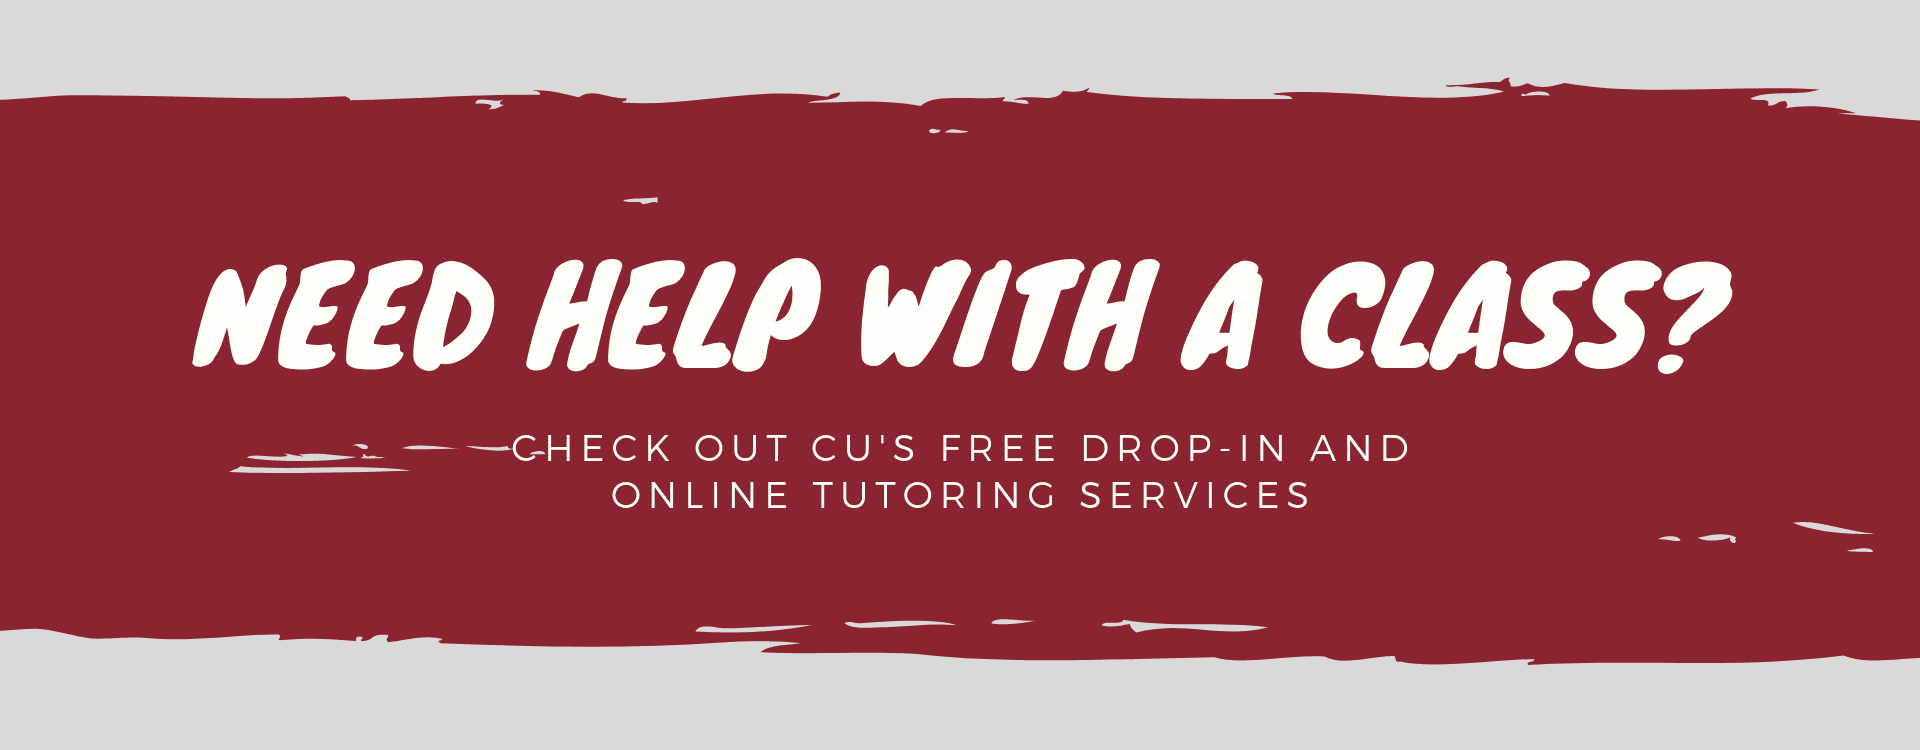 Need help with a class? Click here to check out CU's free drop-in and online tutoring services